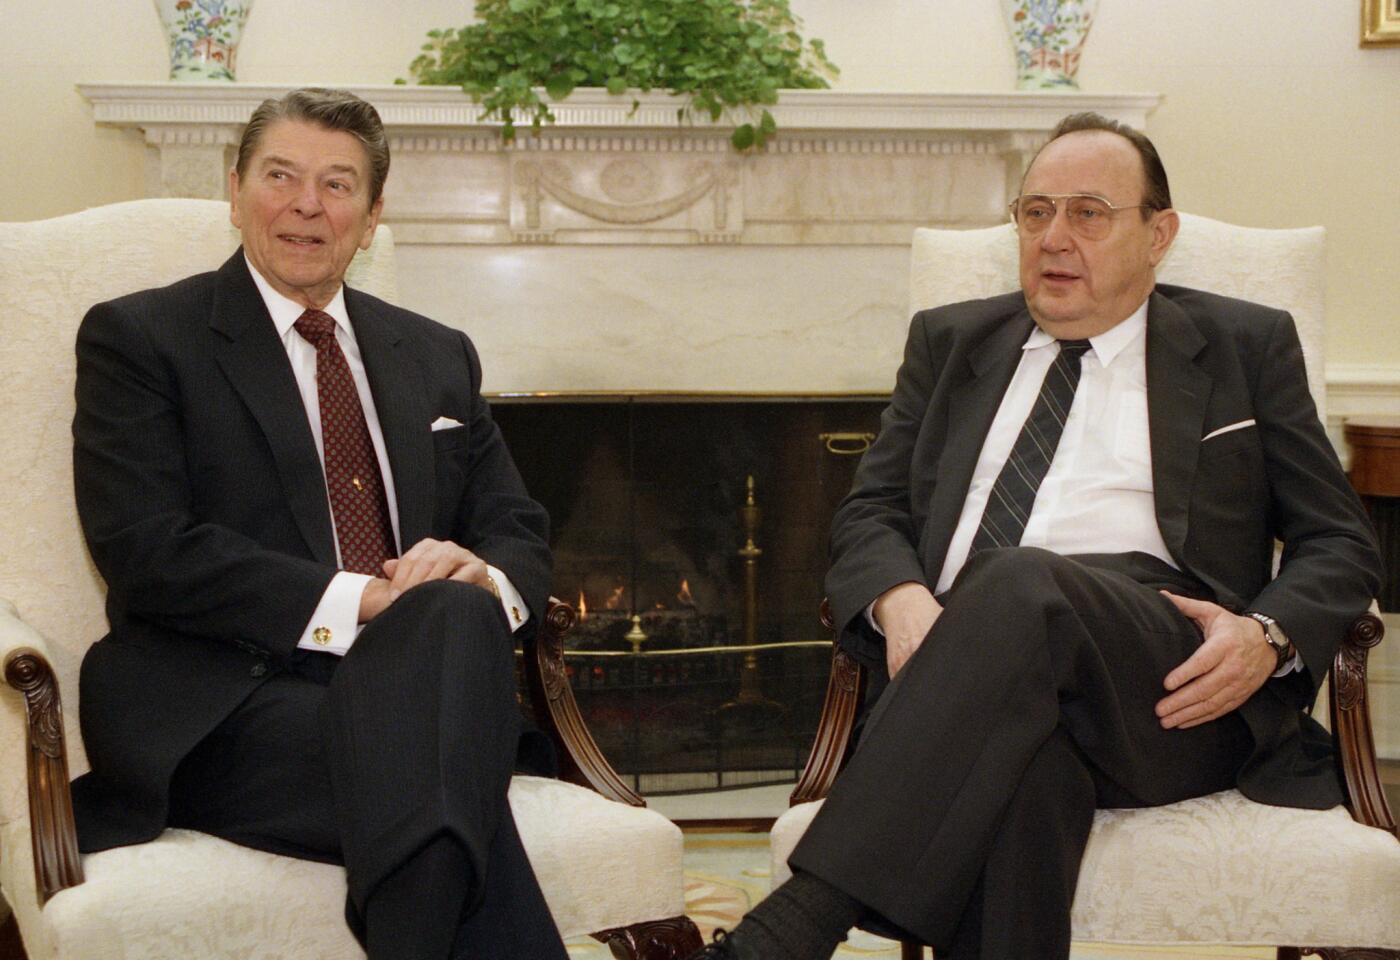 Hans-Dietrich Genscher, West Germany's long-serving foreign minister, visits President Reagan in the Oval Office in 1988.